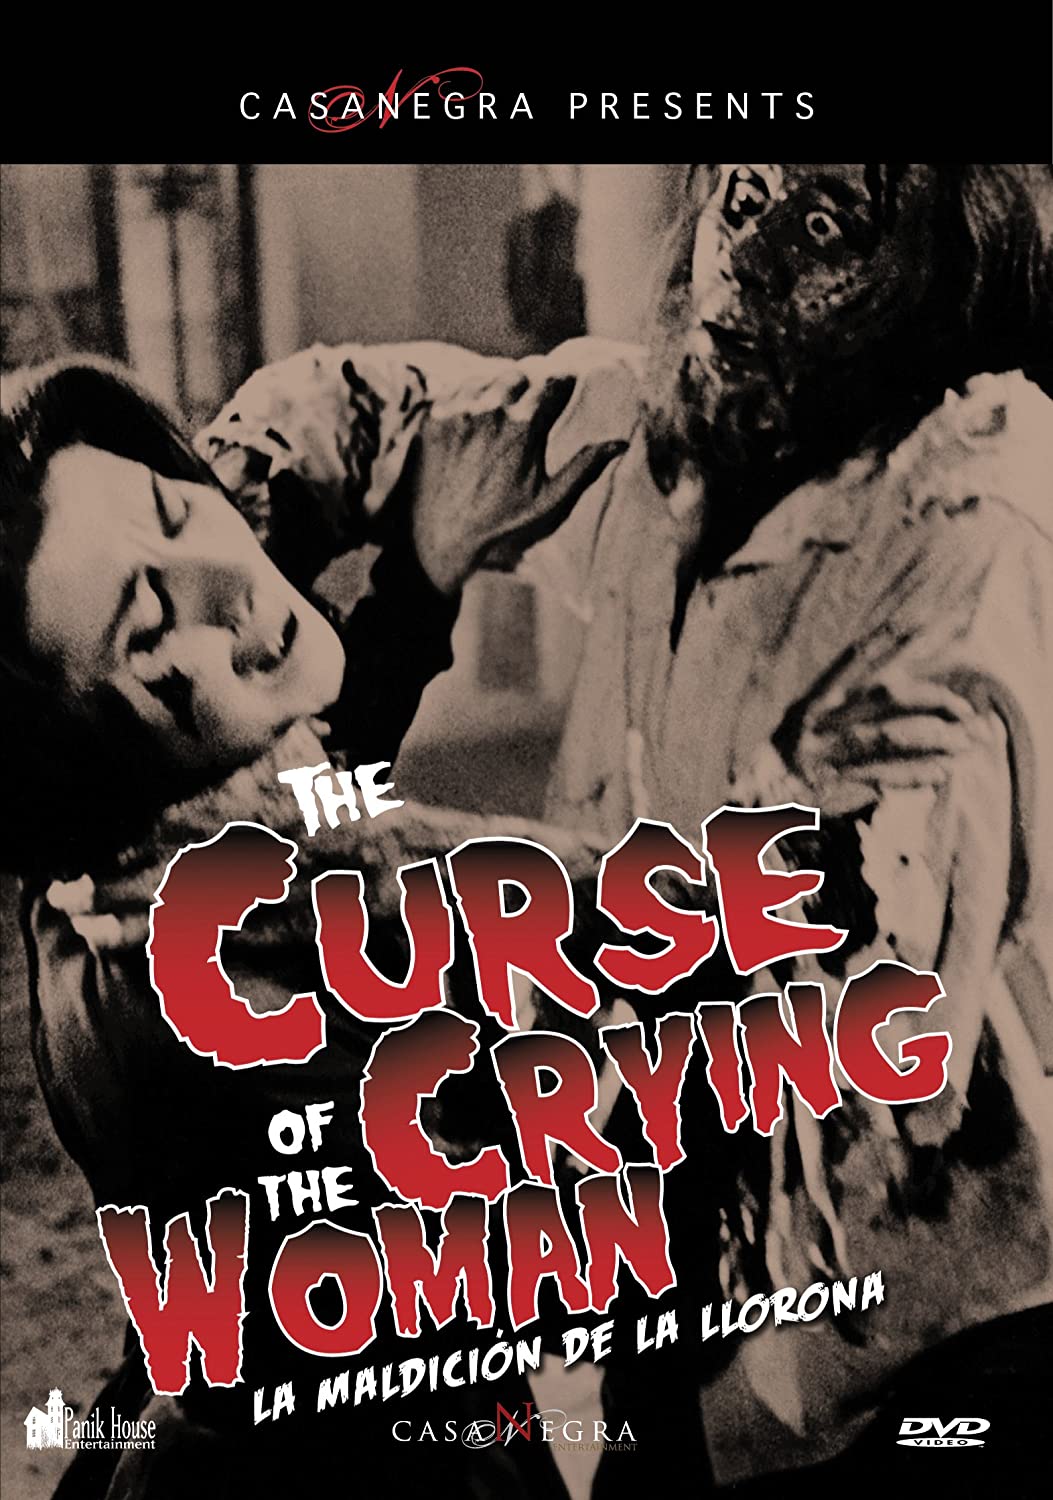 THE CURSE OF THE CRYING WOMAN DVD